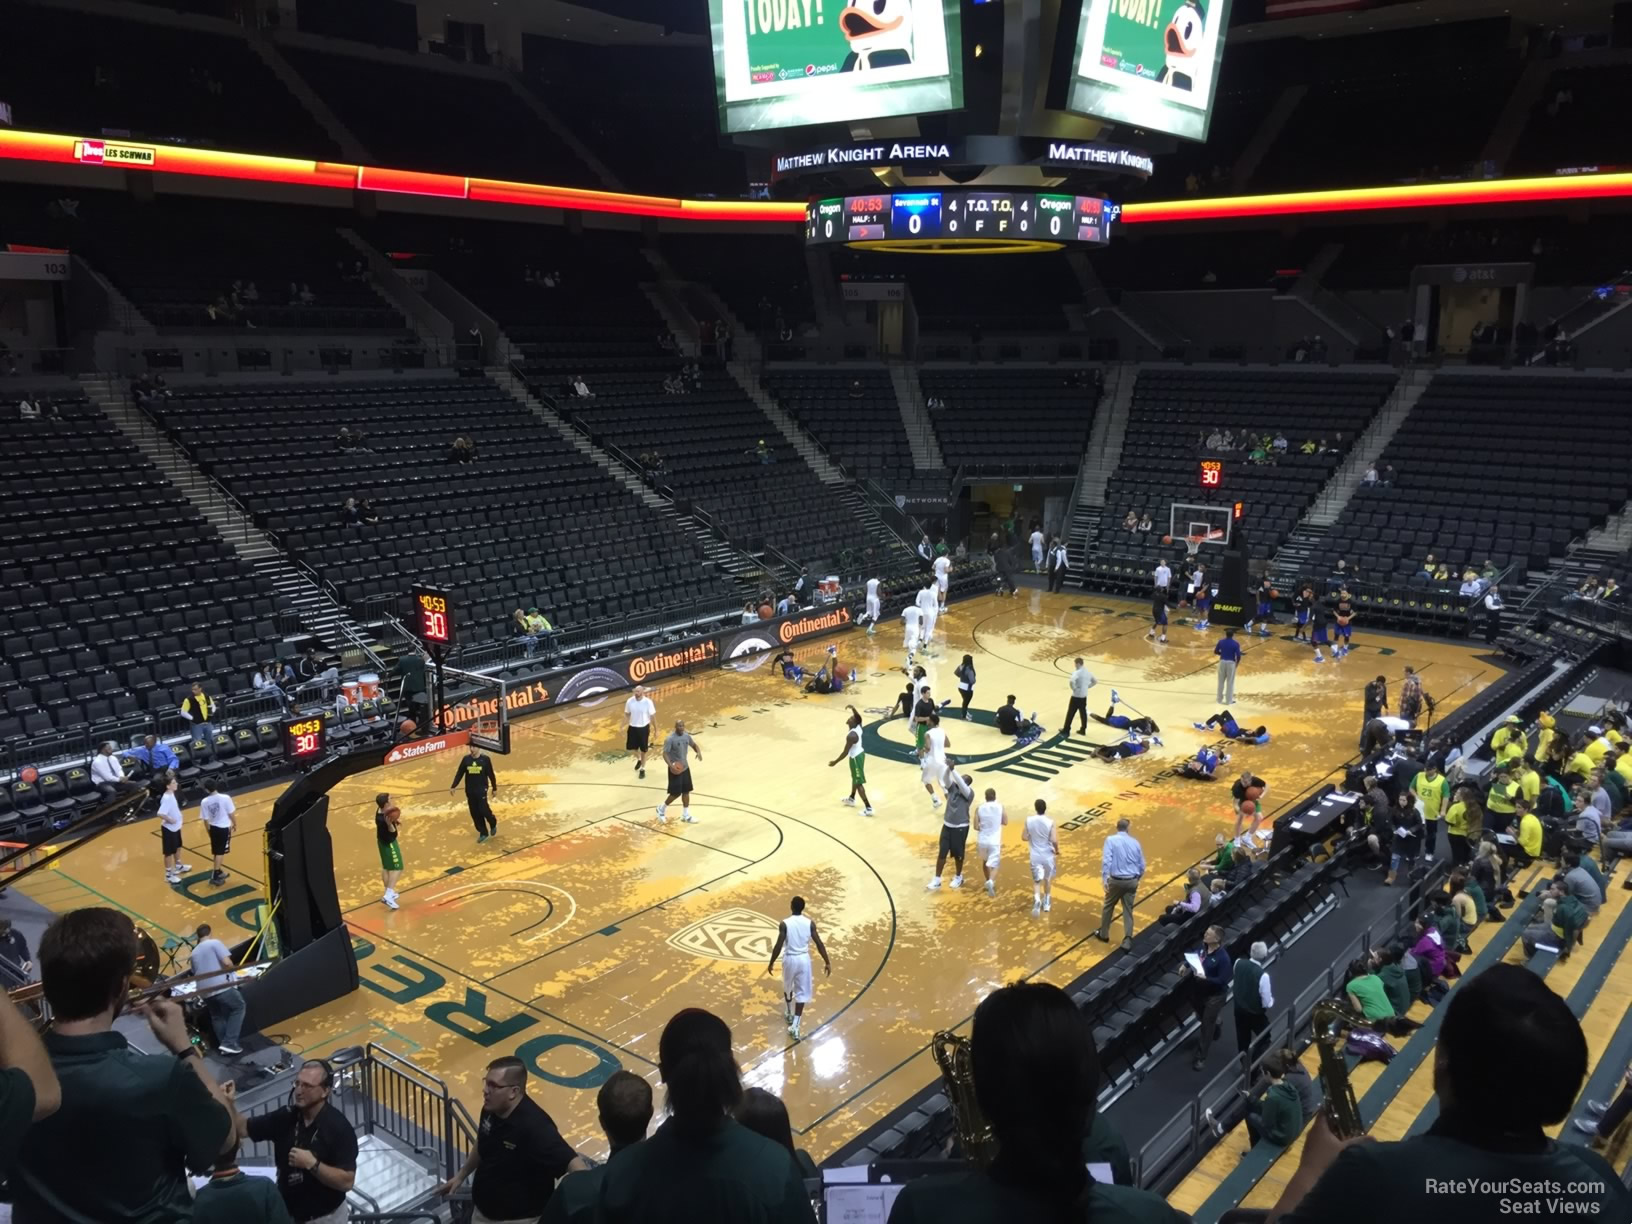 section 115, row k seat view  - matthew knight arena